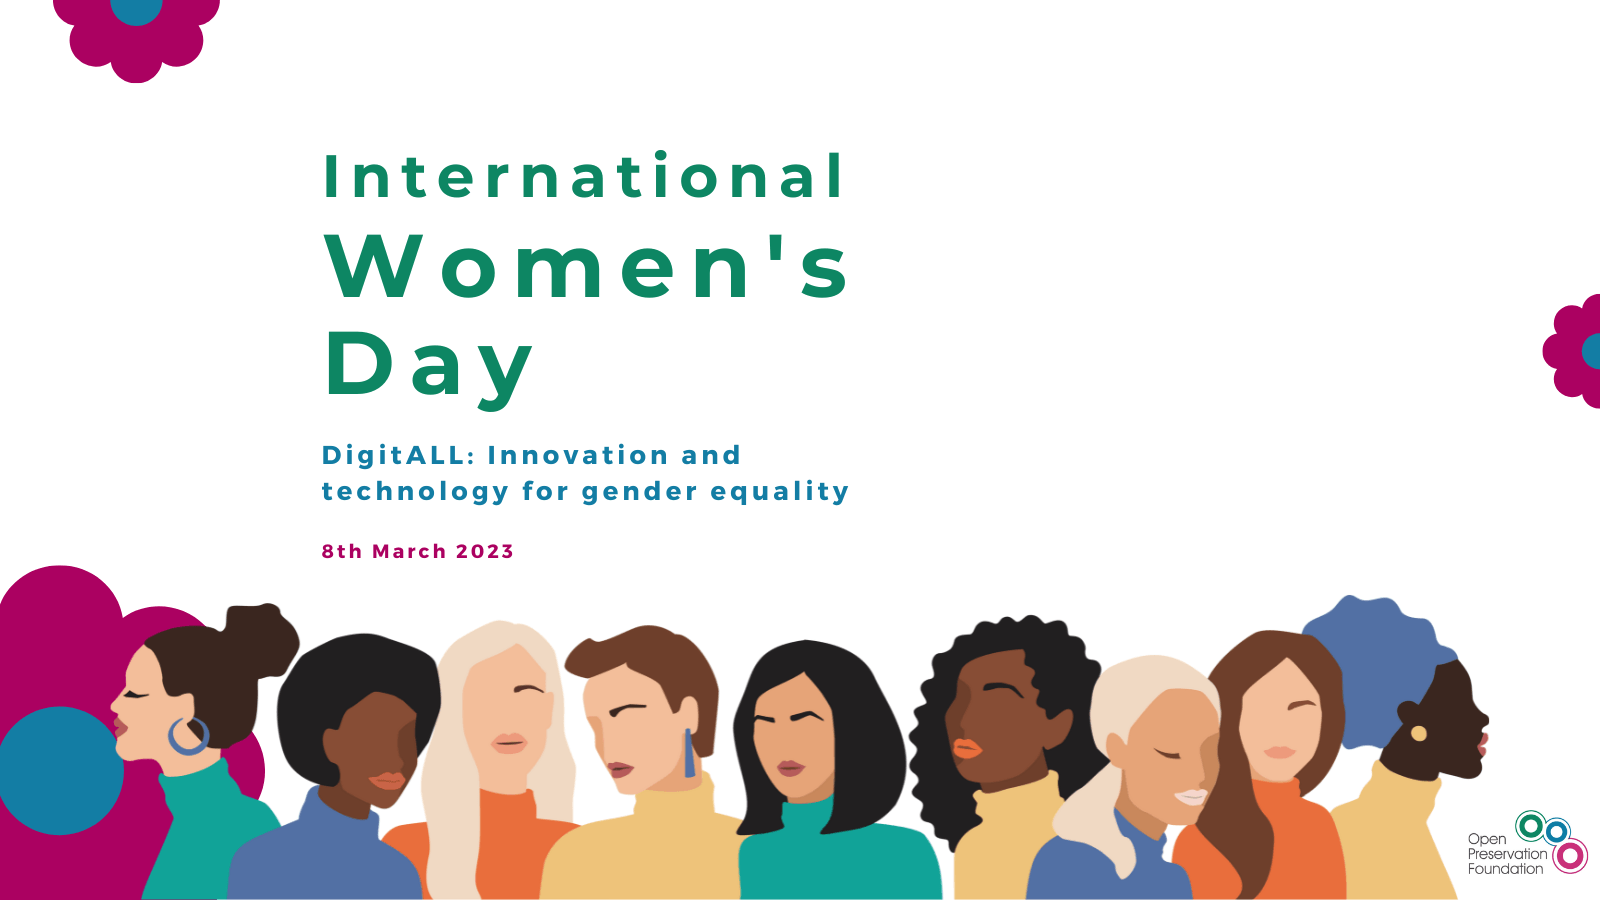 DigitALL Innovation and technology for gender equality